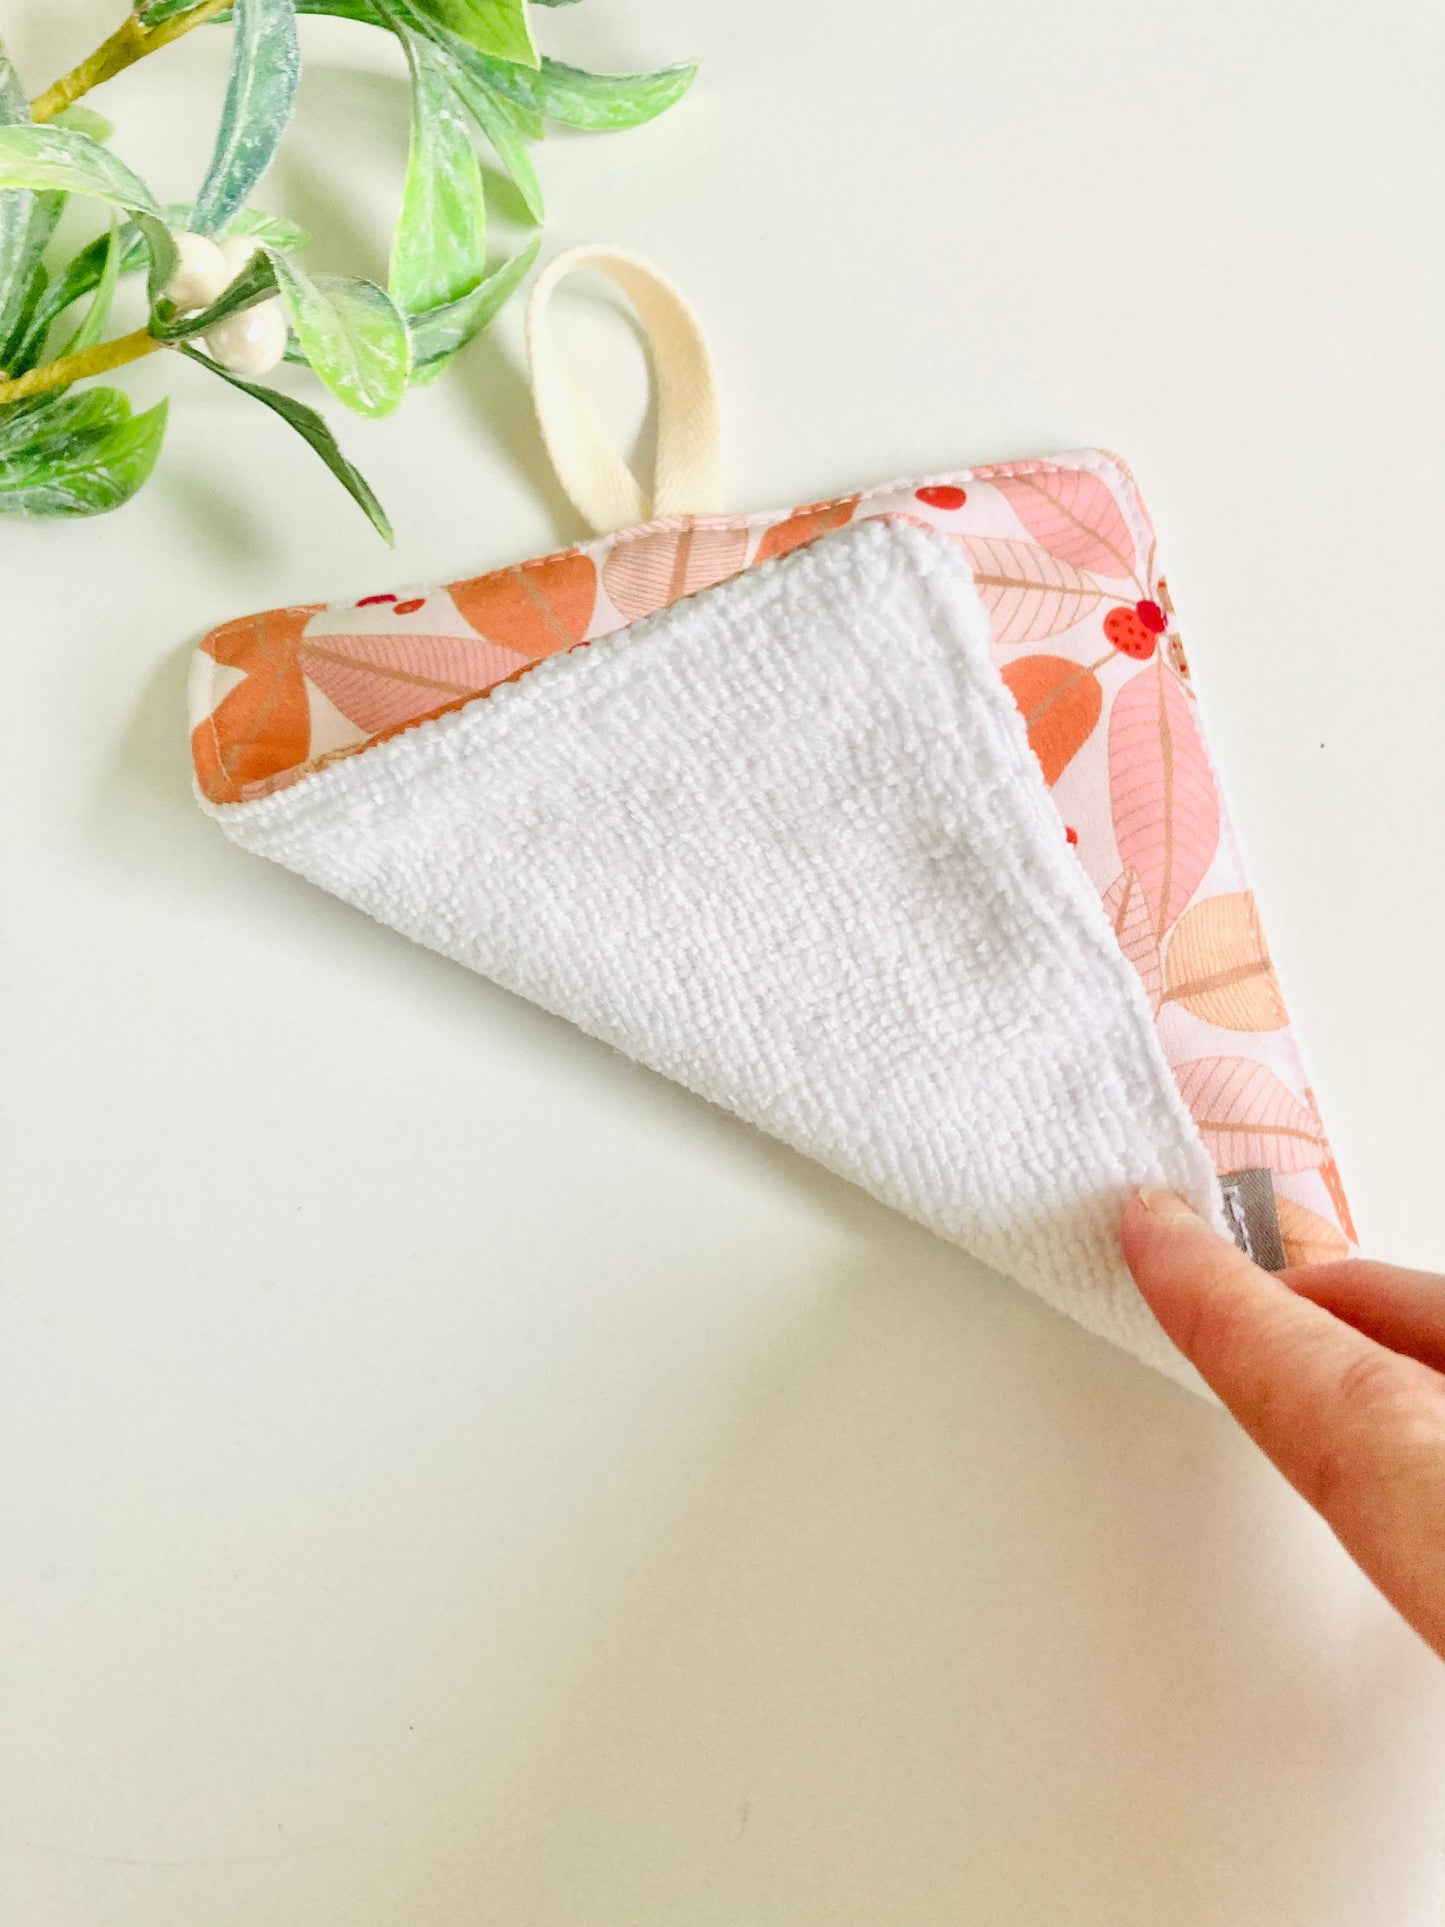 Dish Cloth For Reusable Cleaning